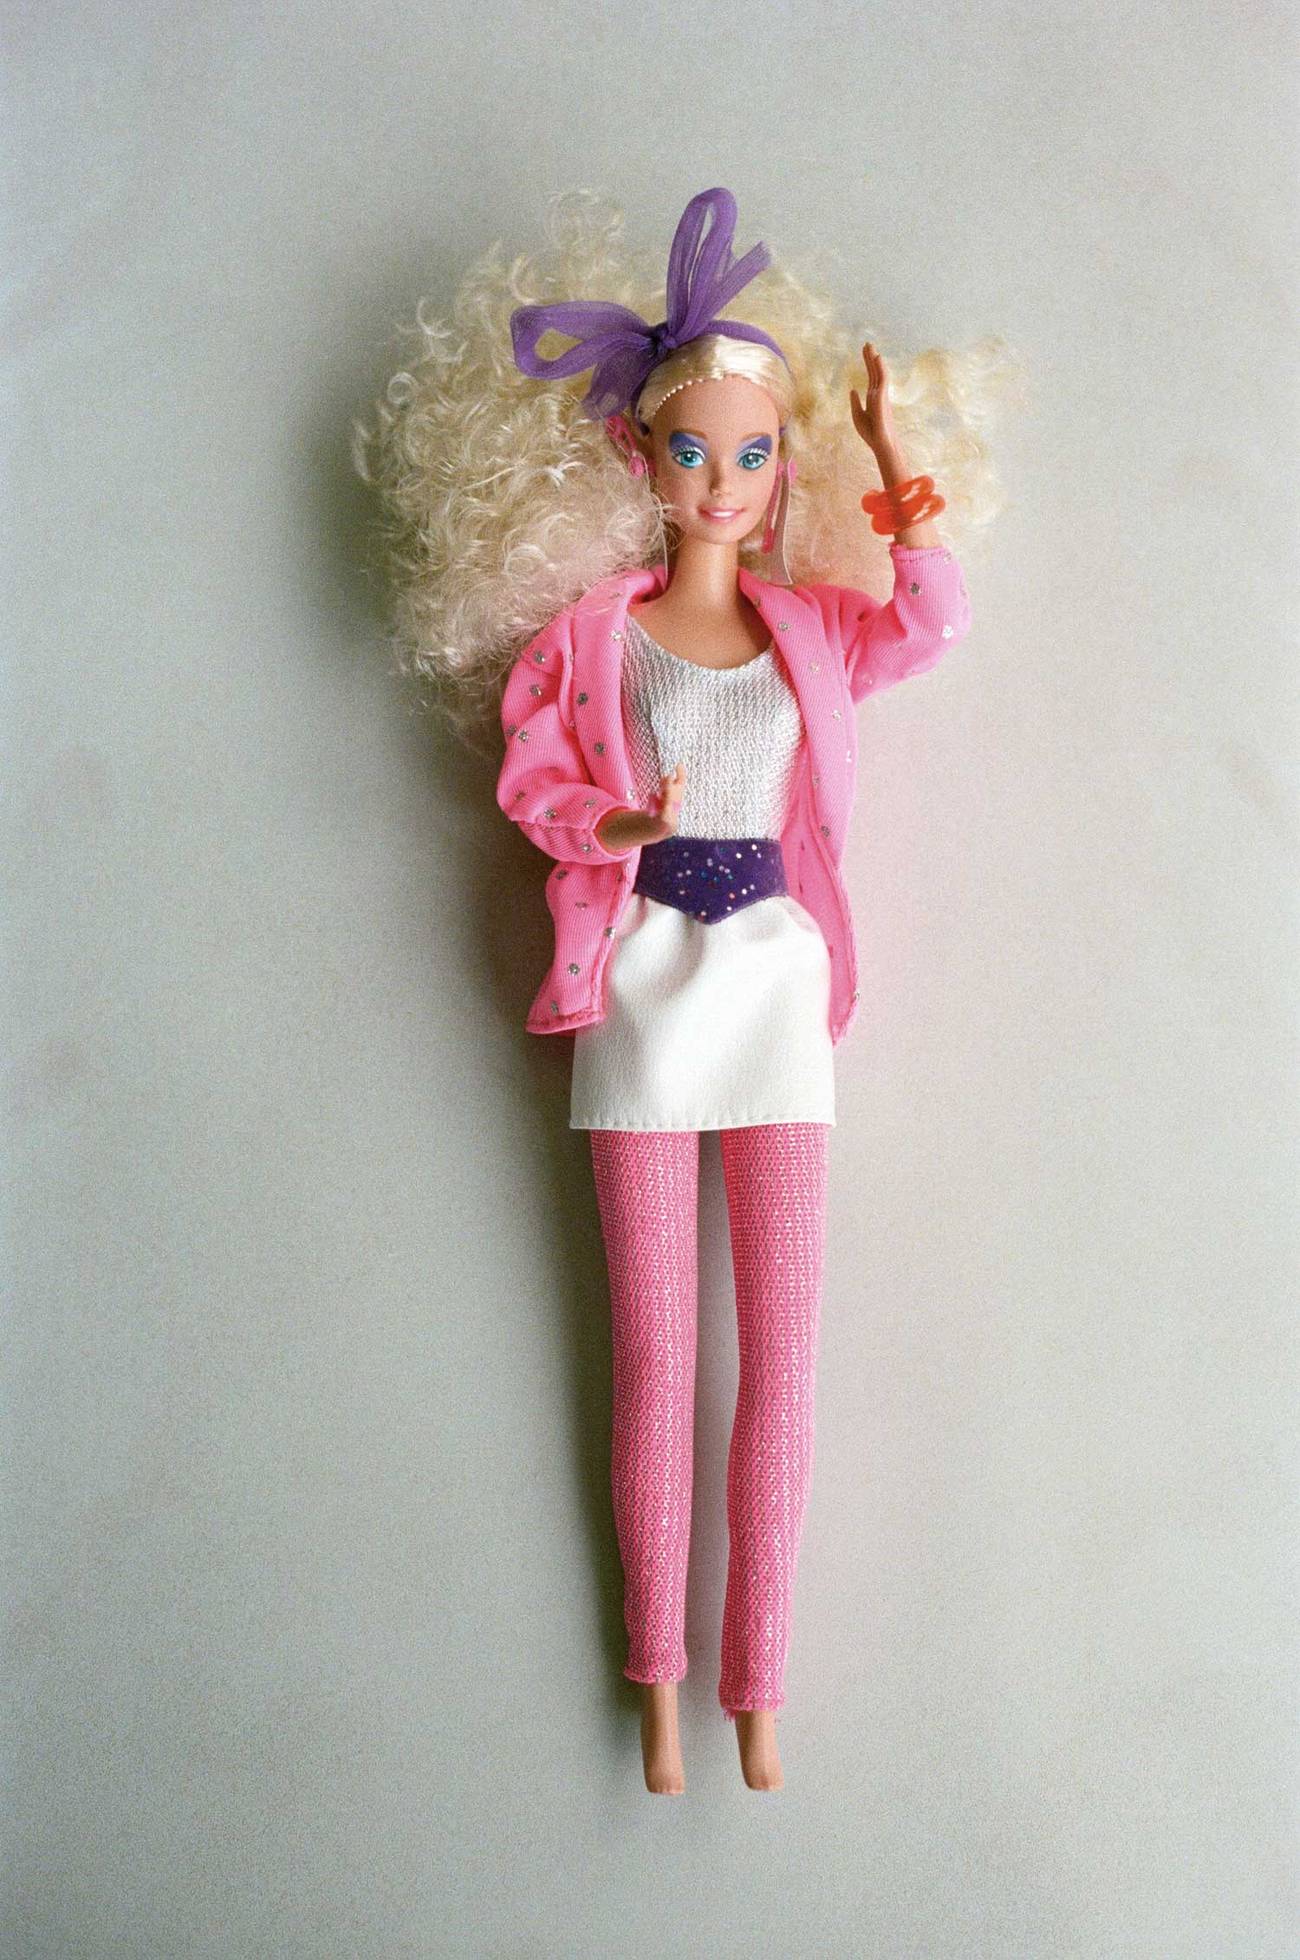 Why was Allan doll discontinued? Controversy behind the Barbie